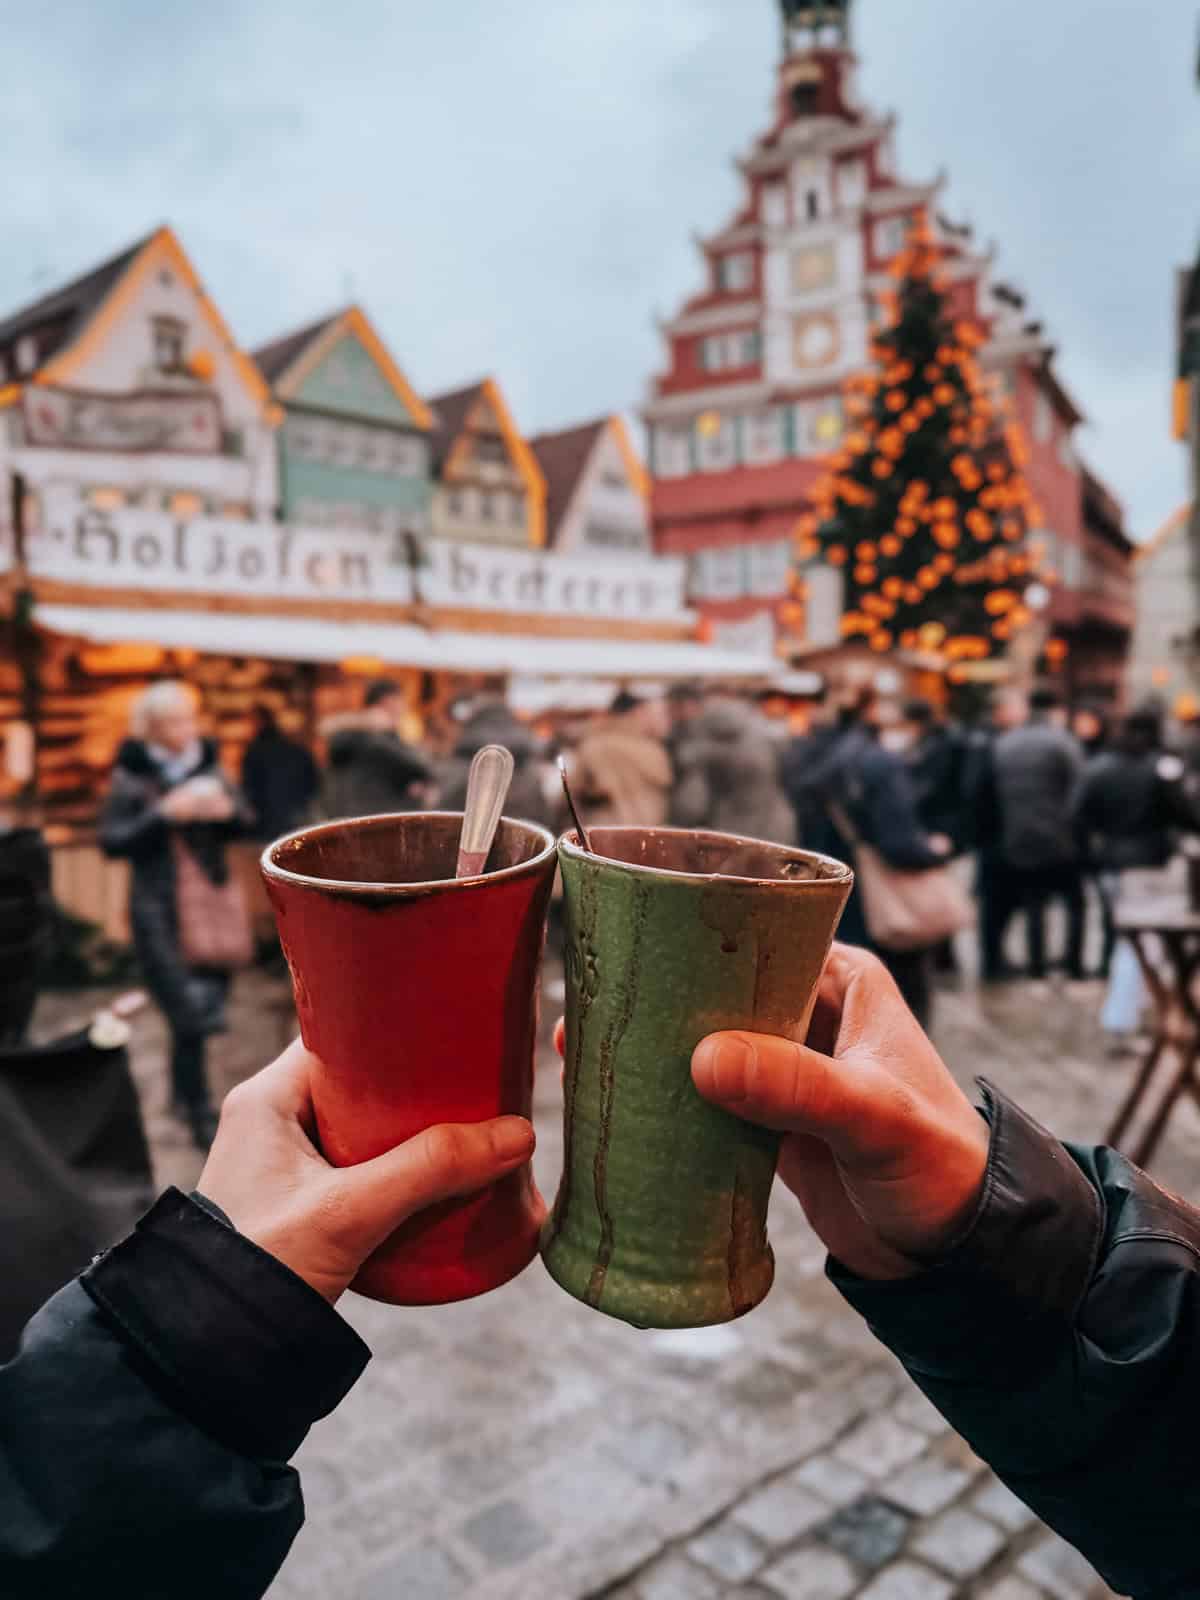 Two hands toasting with colorful ceramic mugs against the backdrop of a bustling Christmas market in Esslingen, with a beautifully lit half-timbered house.